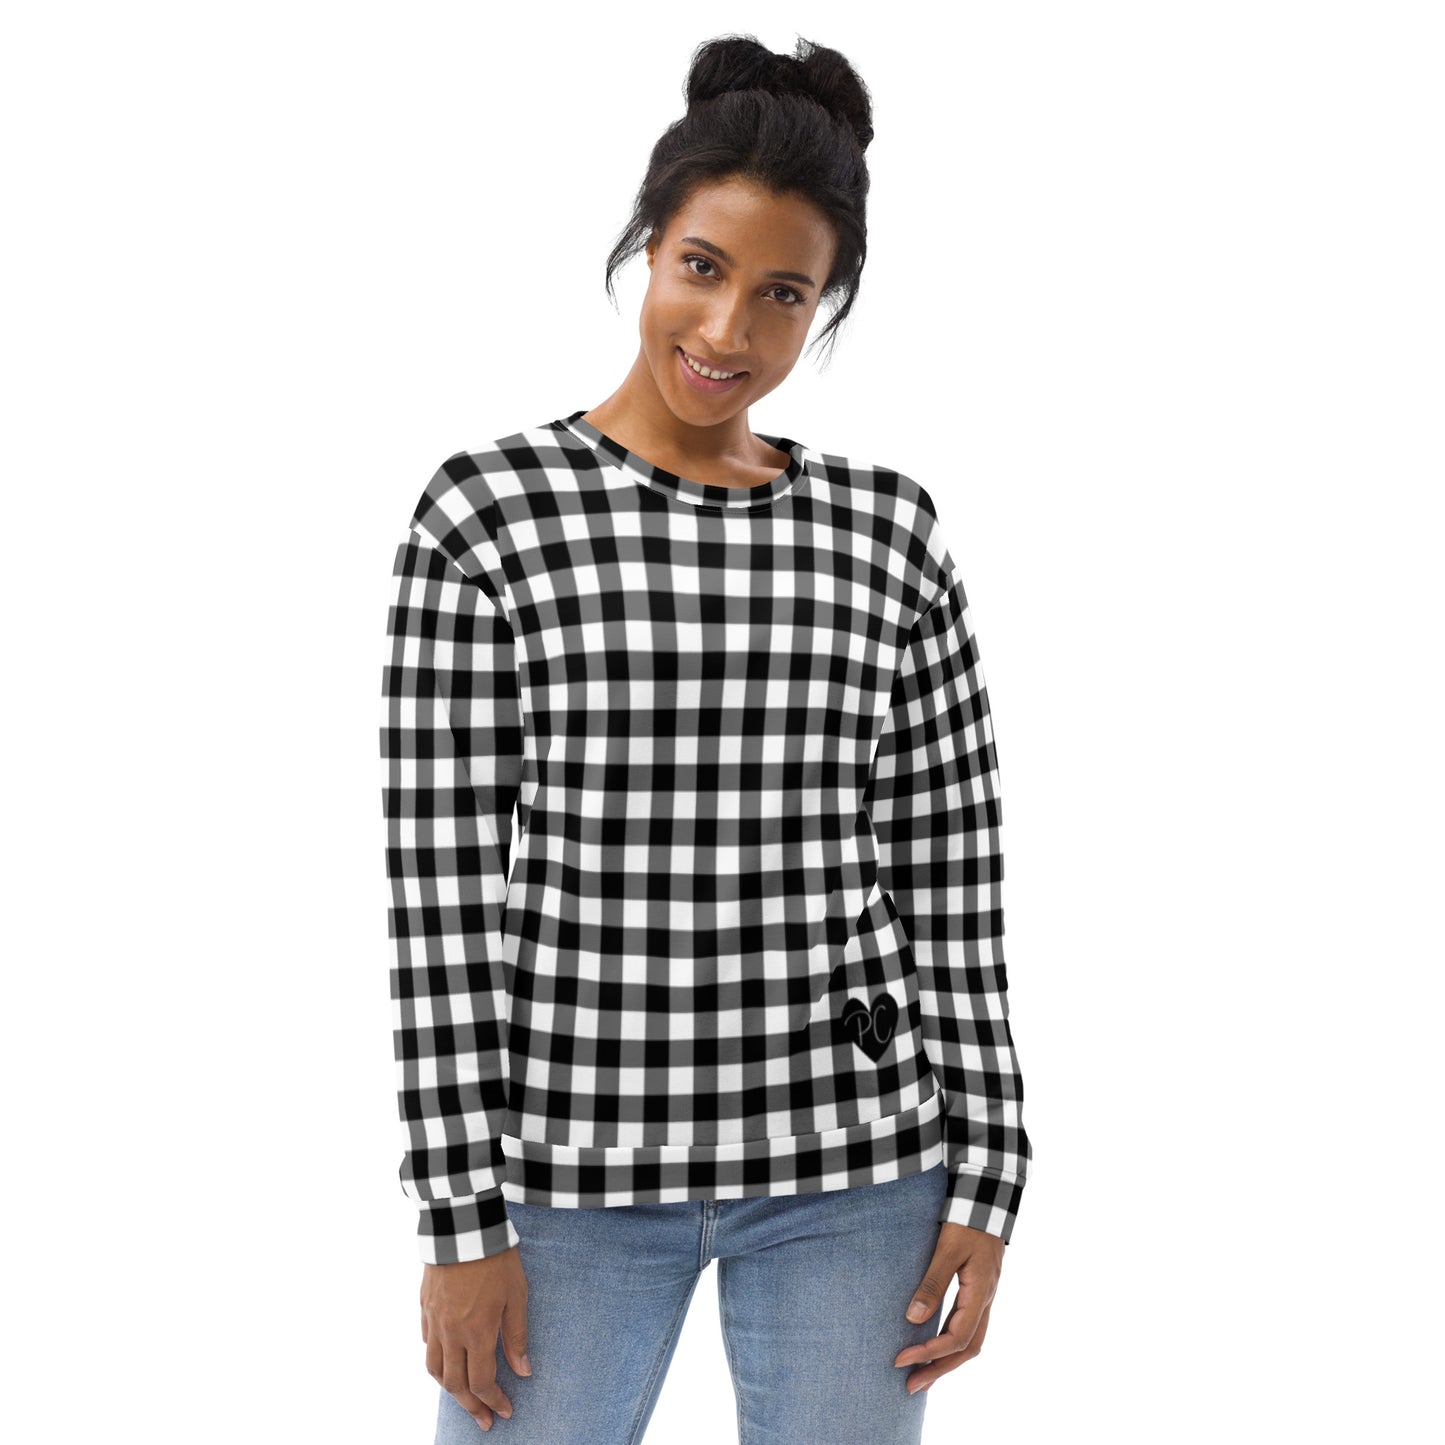 Badass Black Gingham Long-Sleeved Crewneck Sweatshirt | Pinup Couture Relaxed